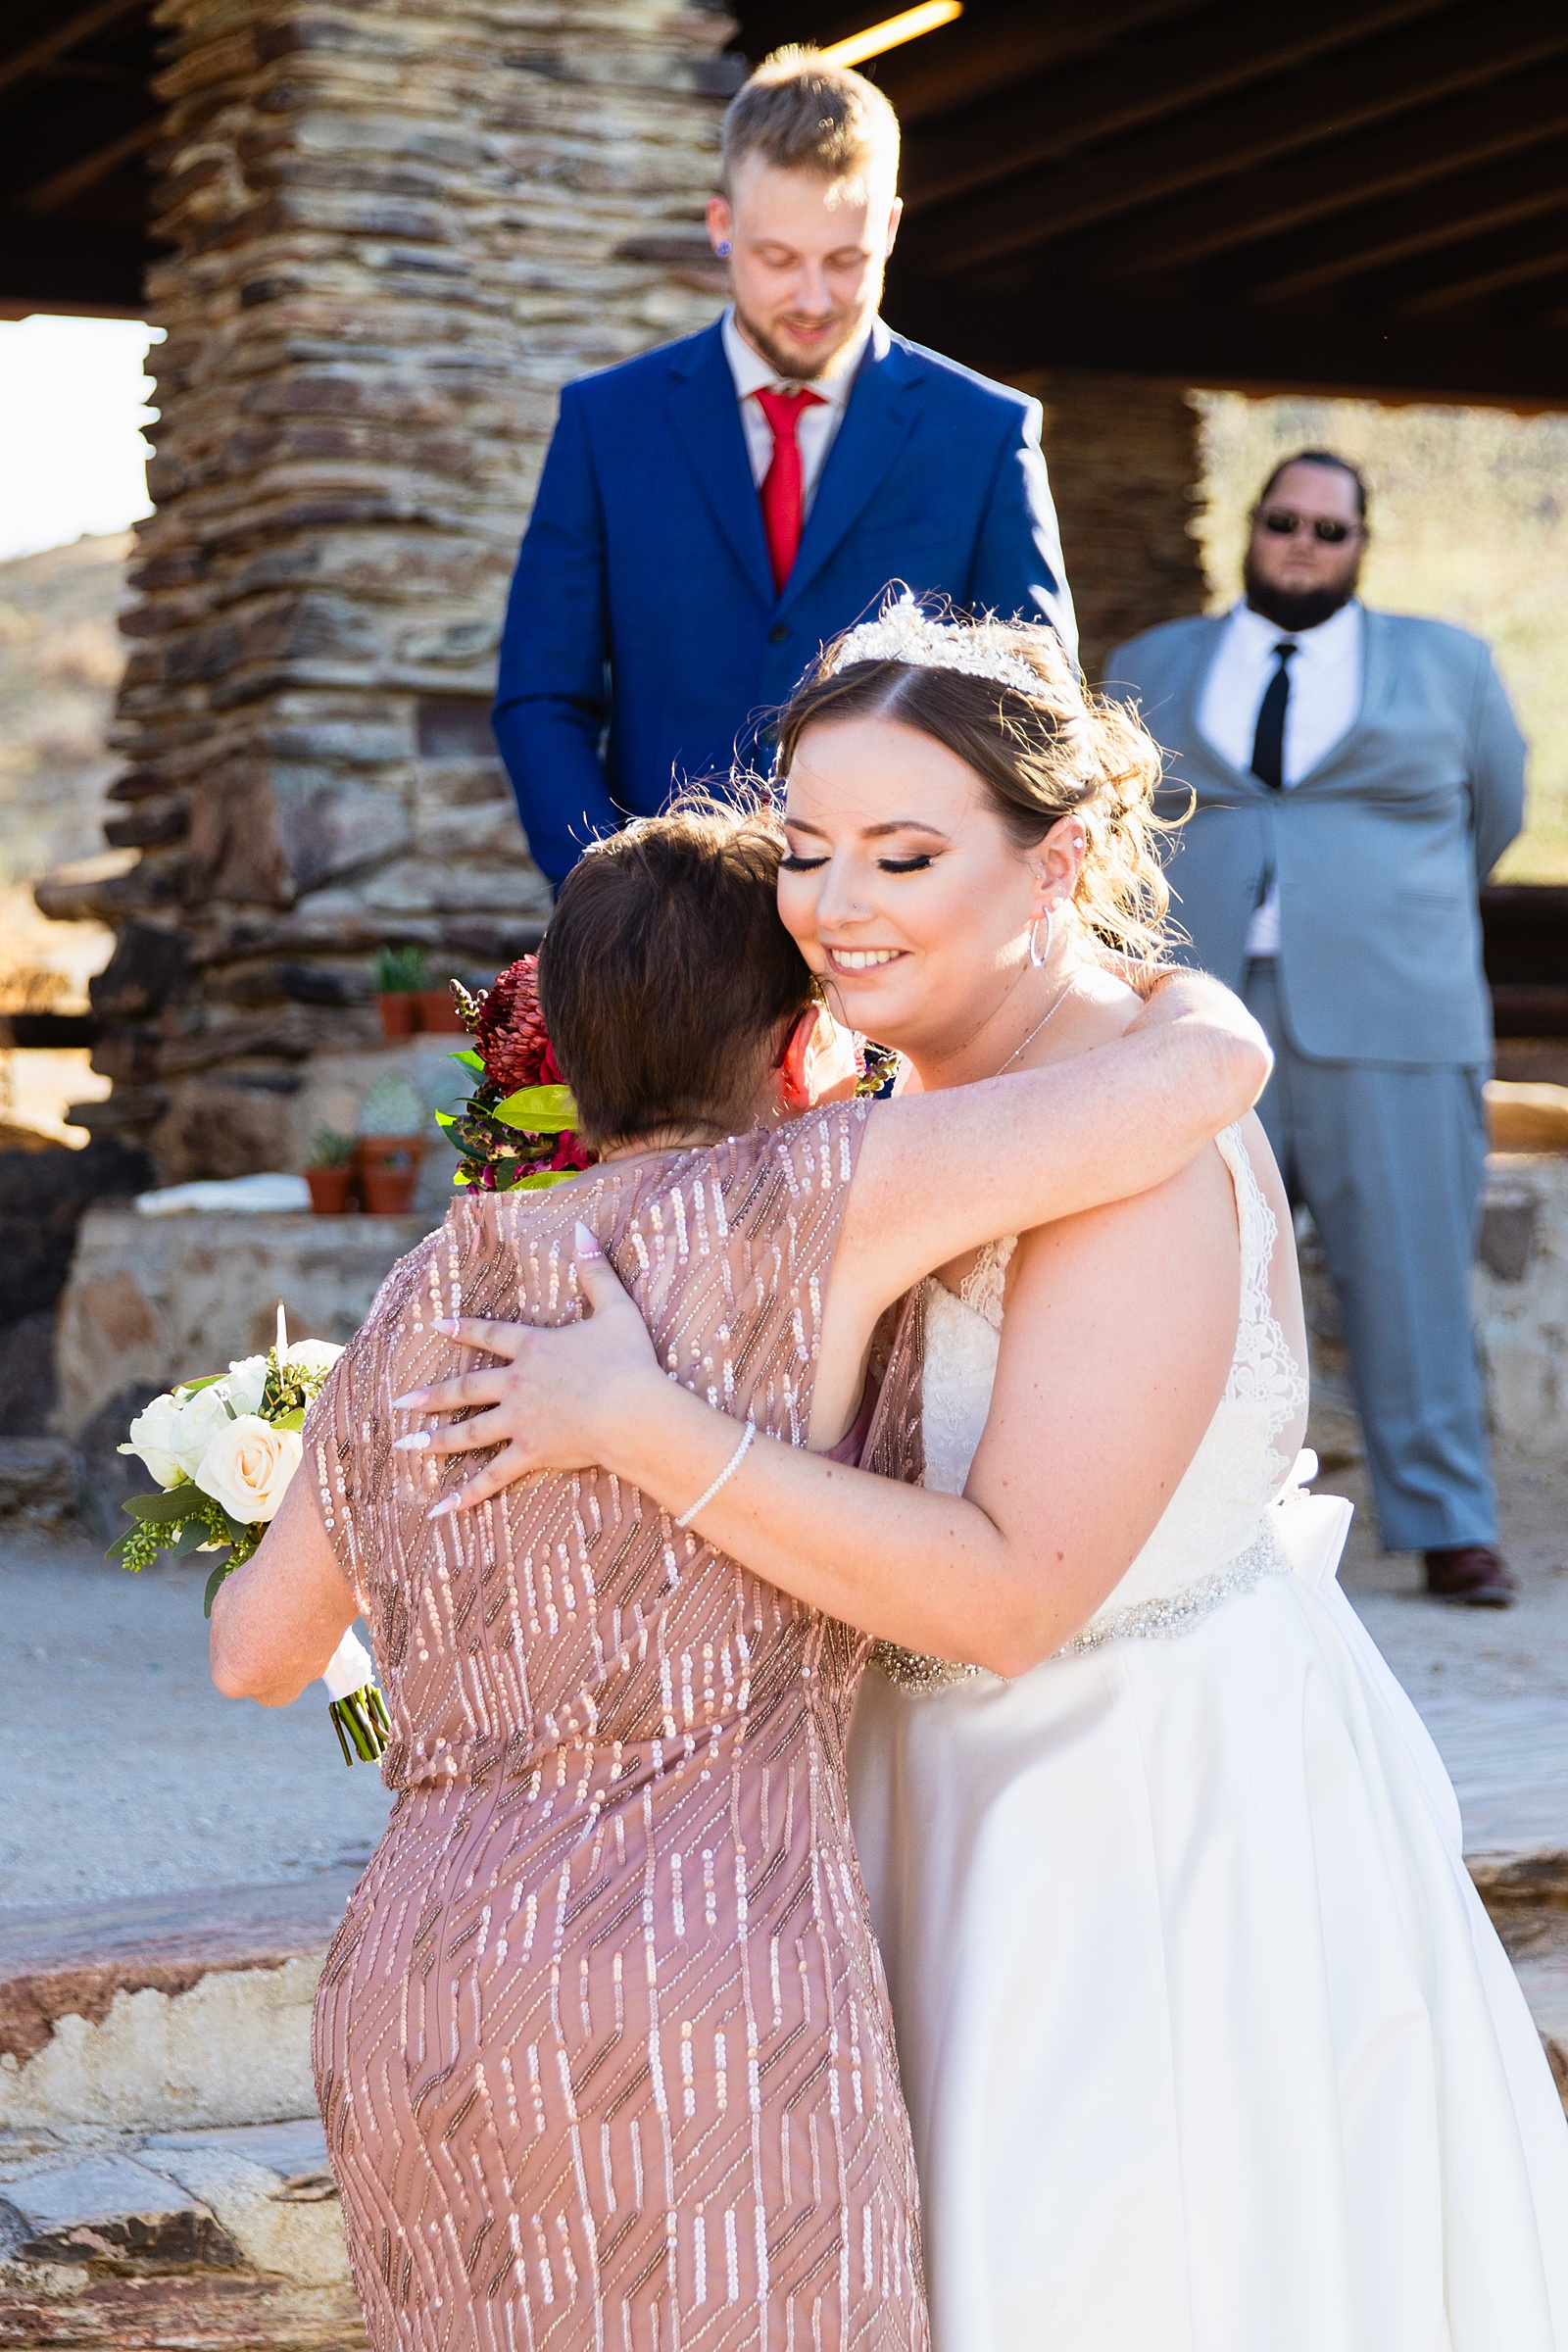 Bride shares a hug during intimate desert wedding ceremony by Phoenix wedding photographer Juniper and Co Photography.